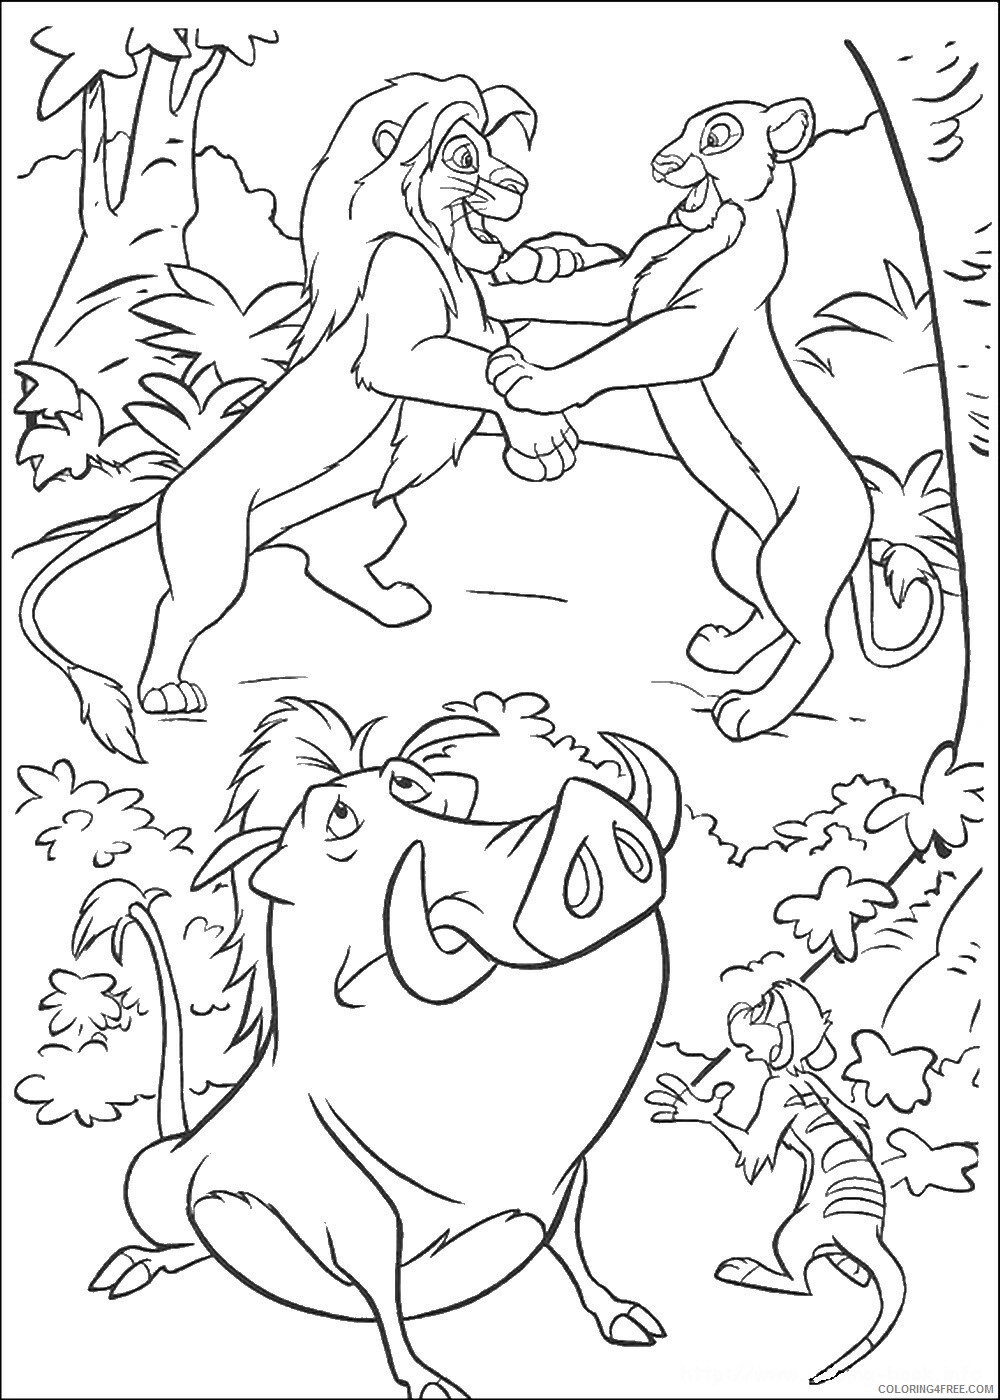 The Lion King Coloring Pages TV Film lionking_92 Printable 2020 09205 Coloring4free